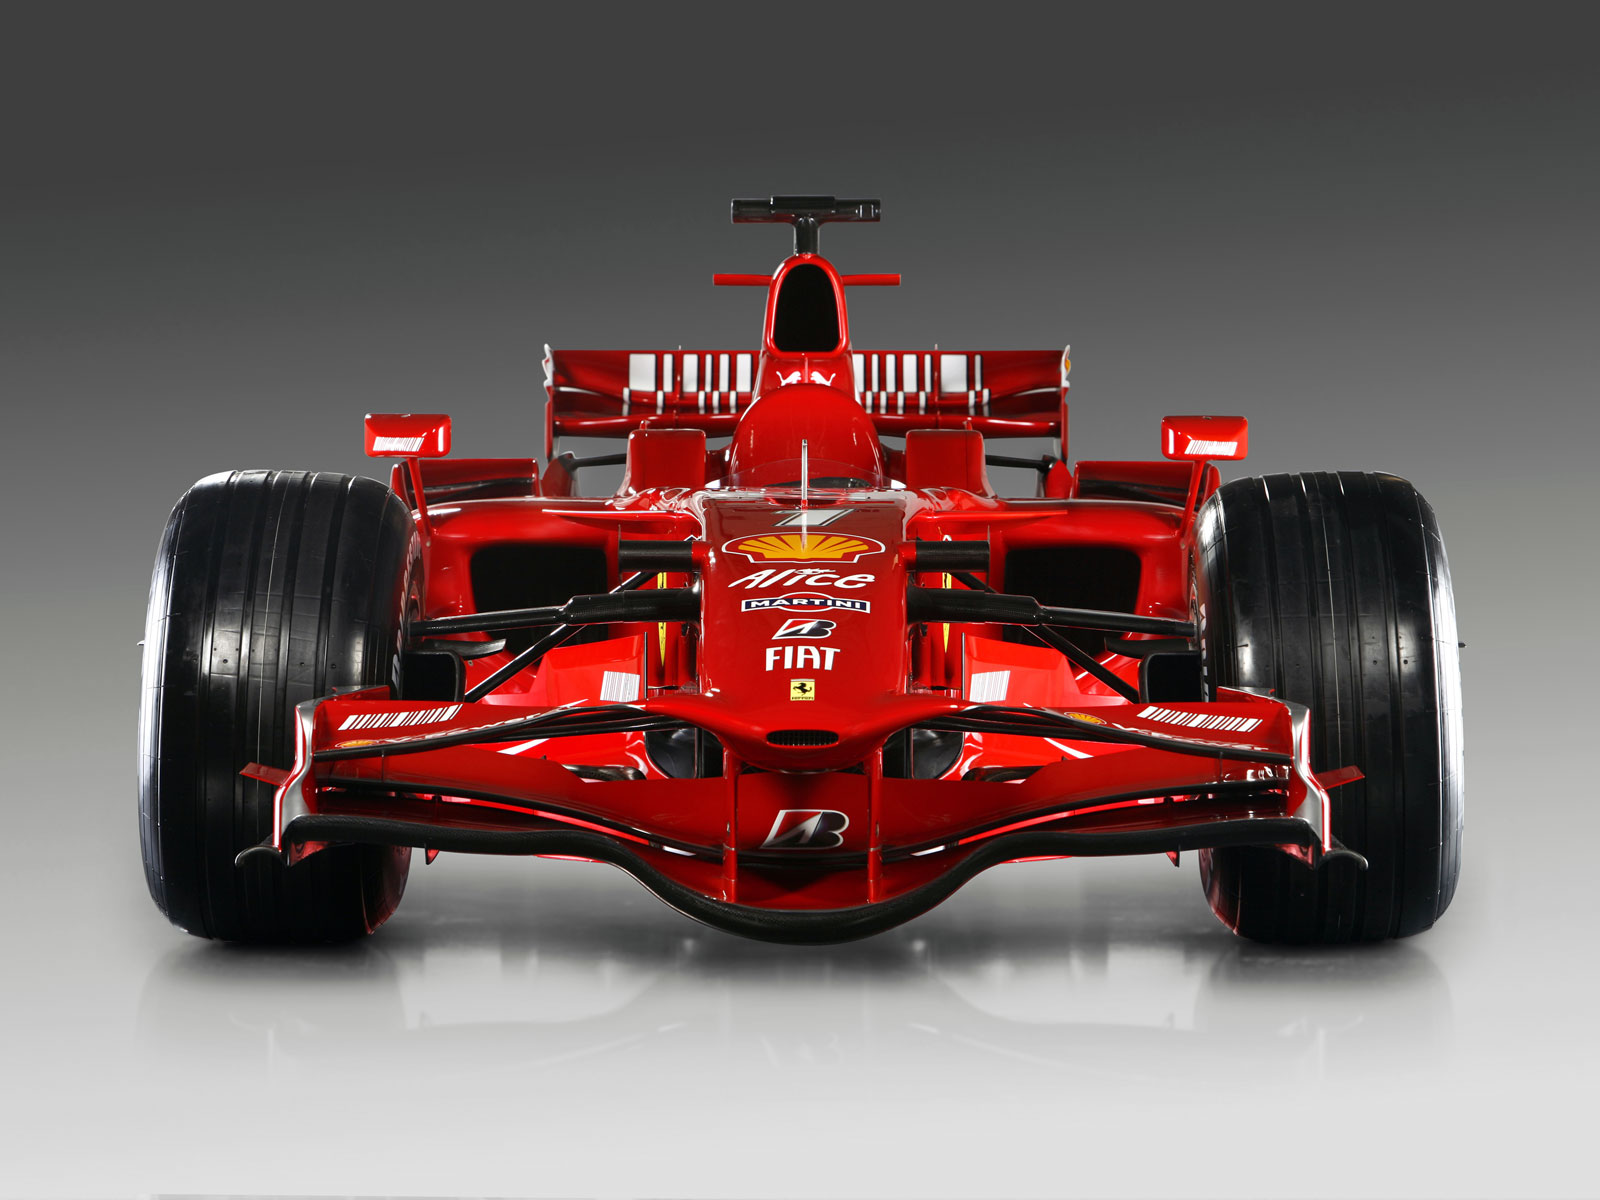 Formula 1 Race 21751 Hd Wallpapers in Sports   Imagescicom